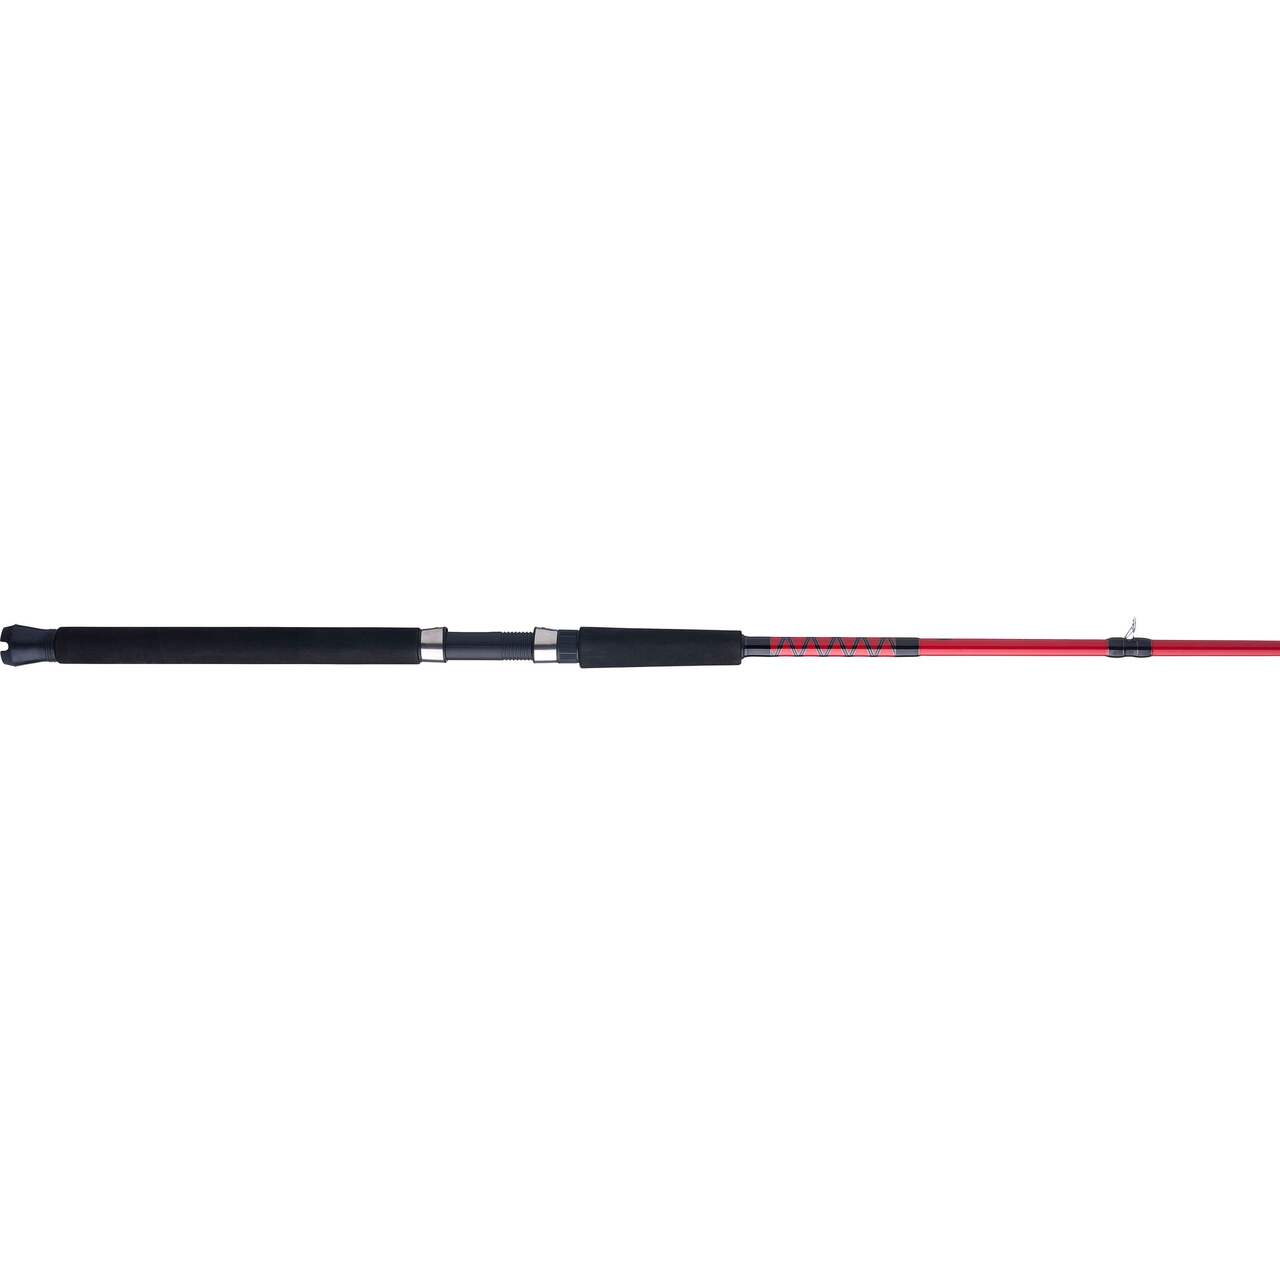 https://media-www.canadiantire.ca/product/playing/fishing/fishing-equipment/0775470/penn-mariner-3-trolling-rod-9-0--7bcc94df-8e97-4cfd-bd31-bc25fa725432-jpgrendition.jpg?imdensity=1&imwidth=640&impolicy=mZoom